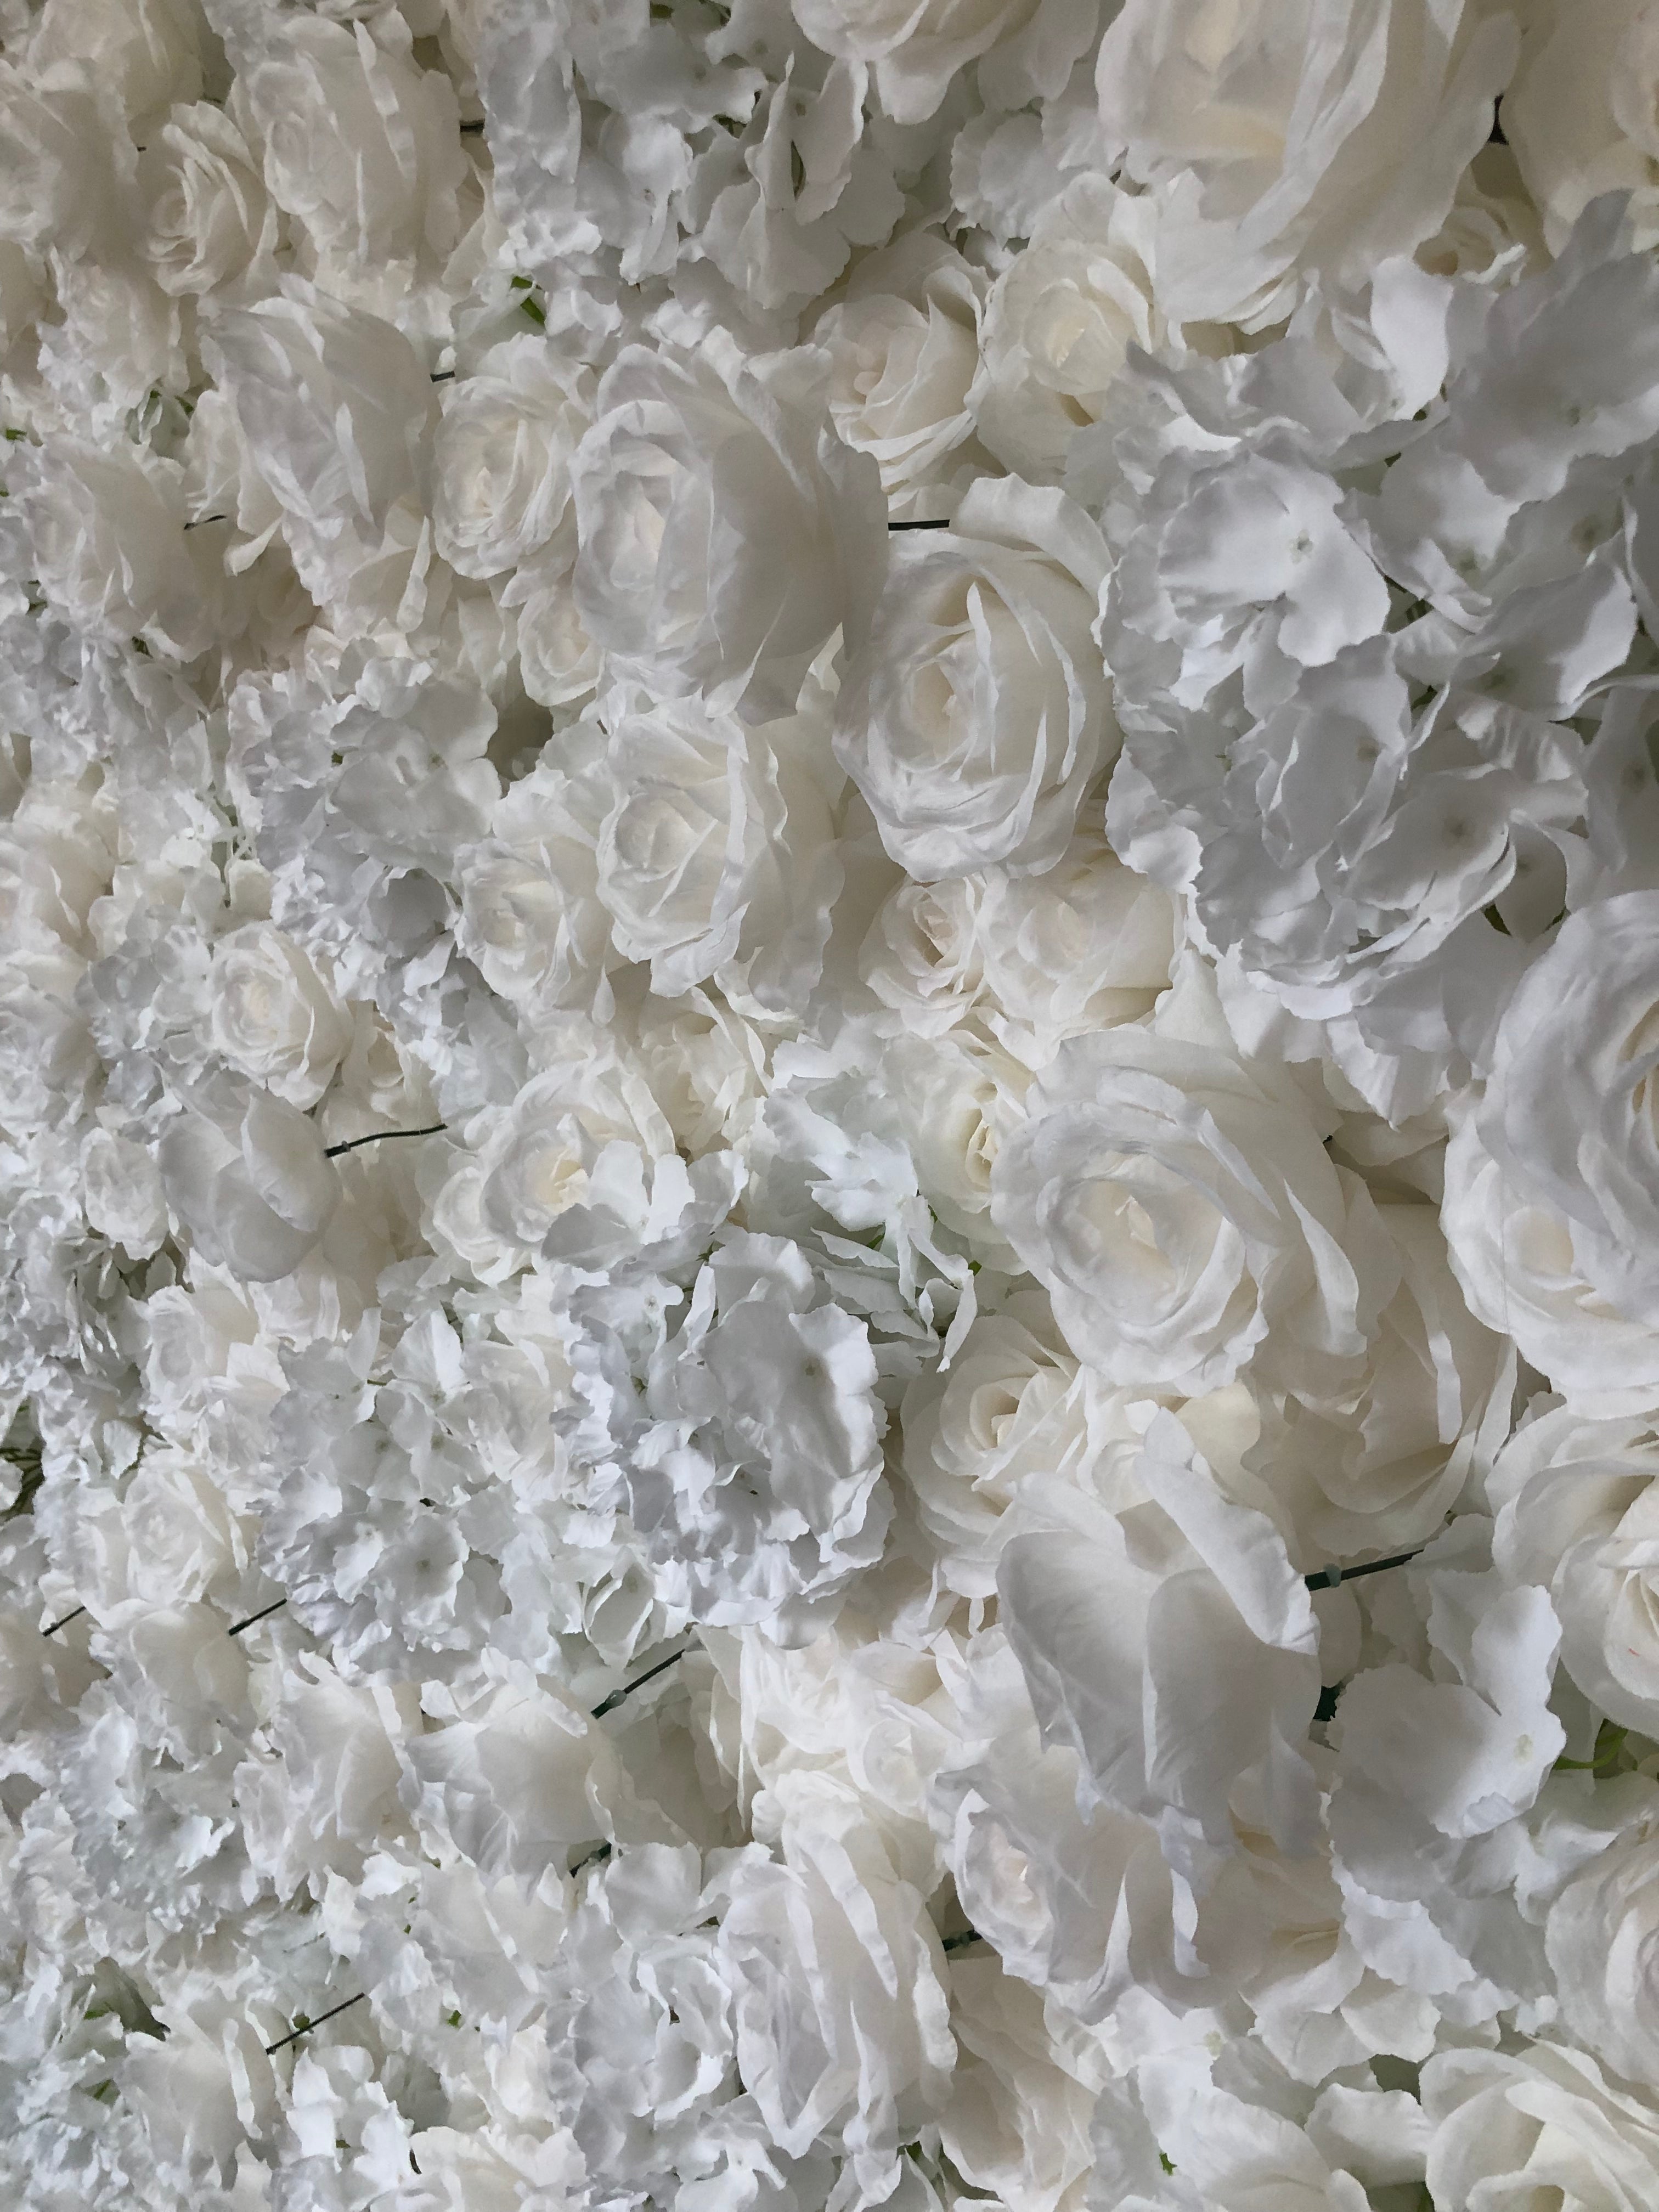 Flower Wall White Rose & Hydrangea Fabric Rolling Up Curtain Floral Backdrop Wedding Party Proposal Decor